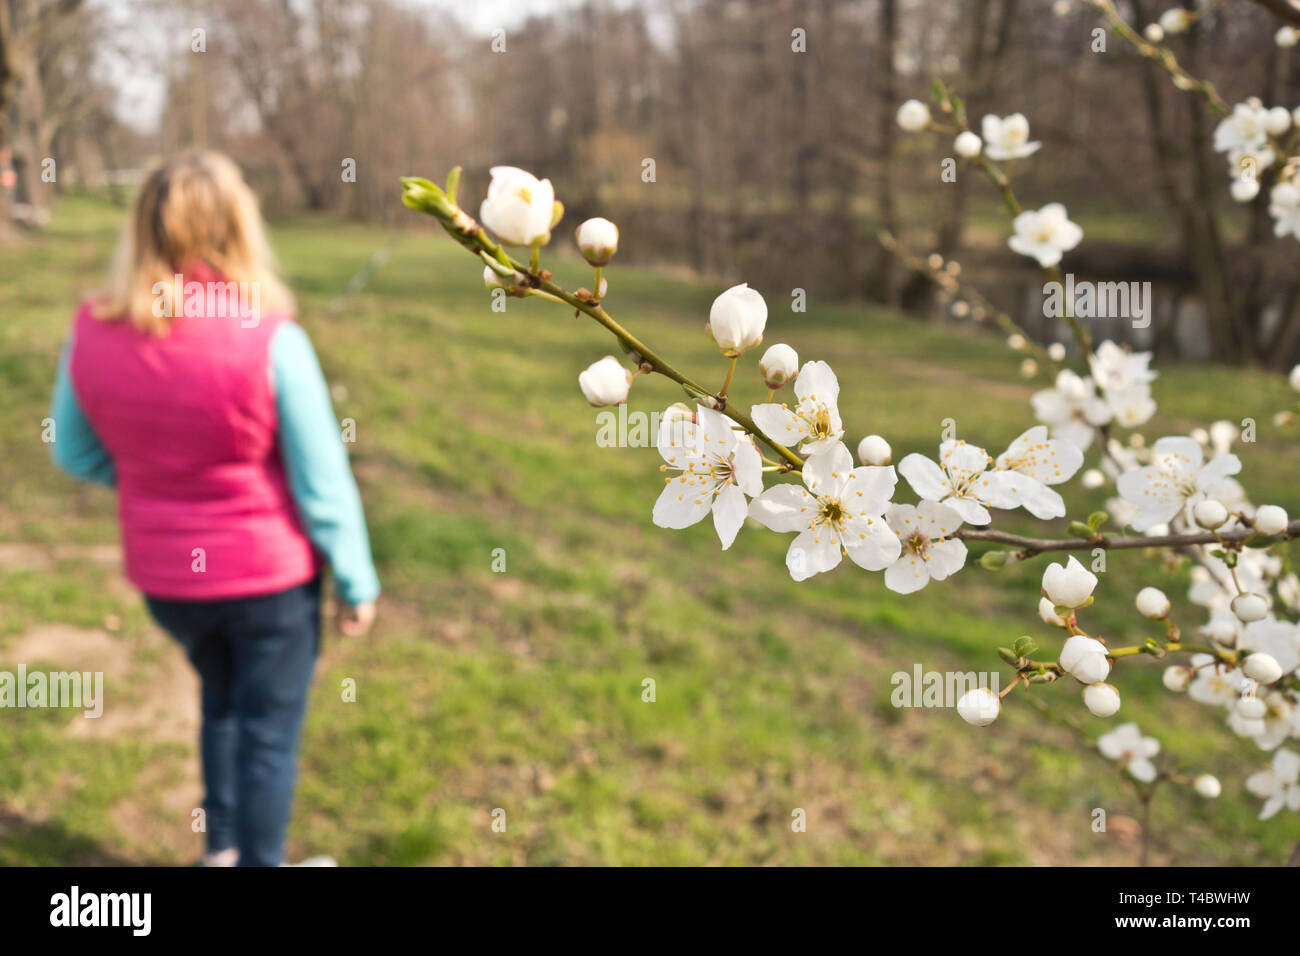 blonde woman near an apple tree branch with flowers blooming Stock Photo